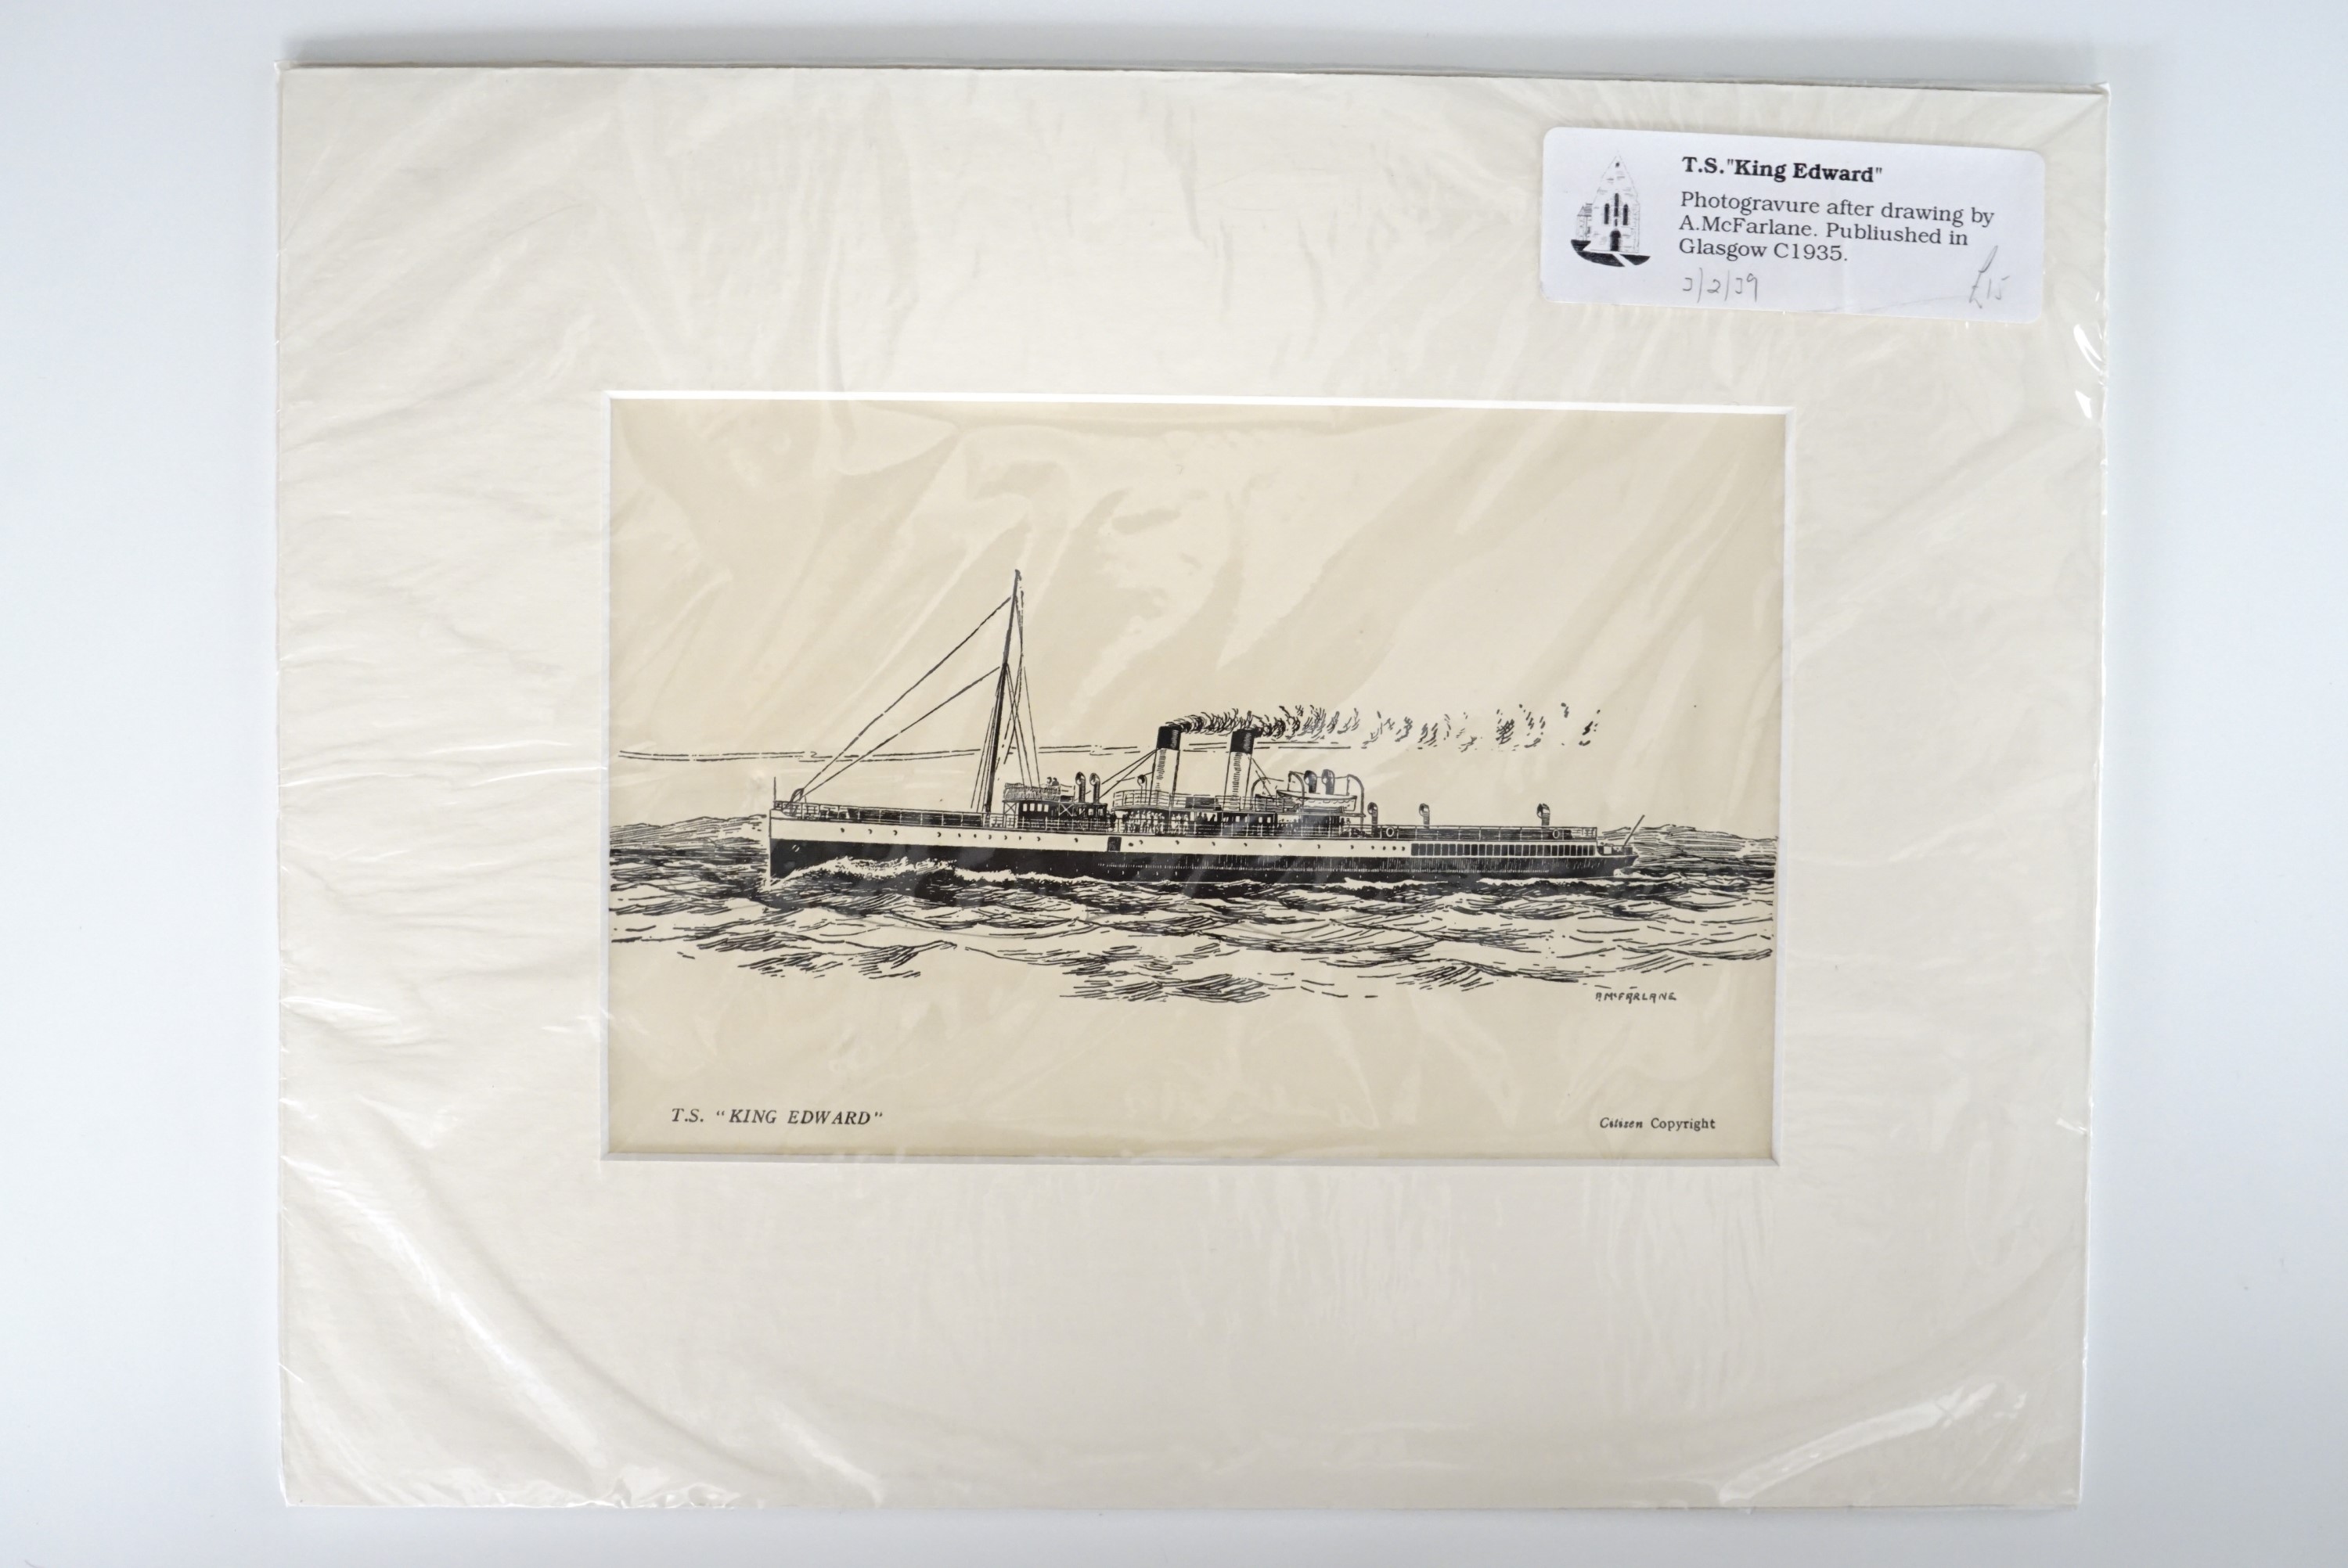 After A McFarlane (20th Century) A series of seven photogravure prints depicting cruise ships, - Image 7 of 7